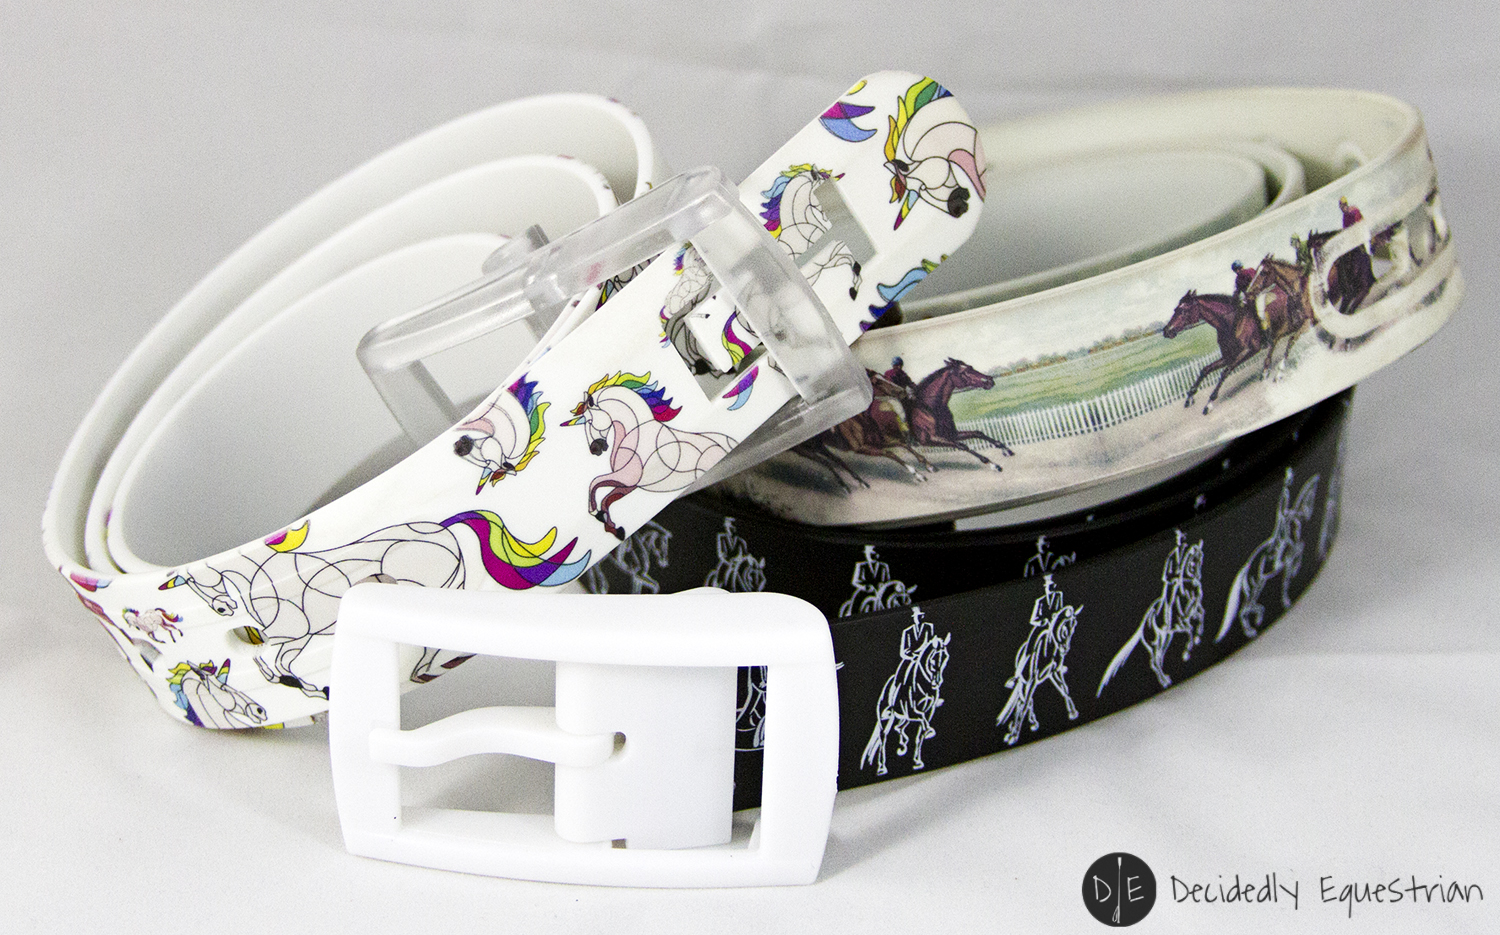 5 Reasons why C4 Belts are Awesome! A C4 Belt Review - Decidedly Equestrian